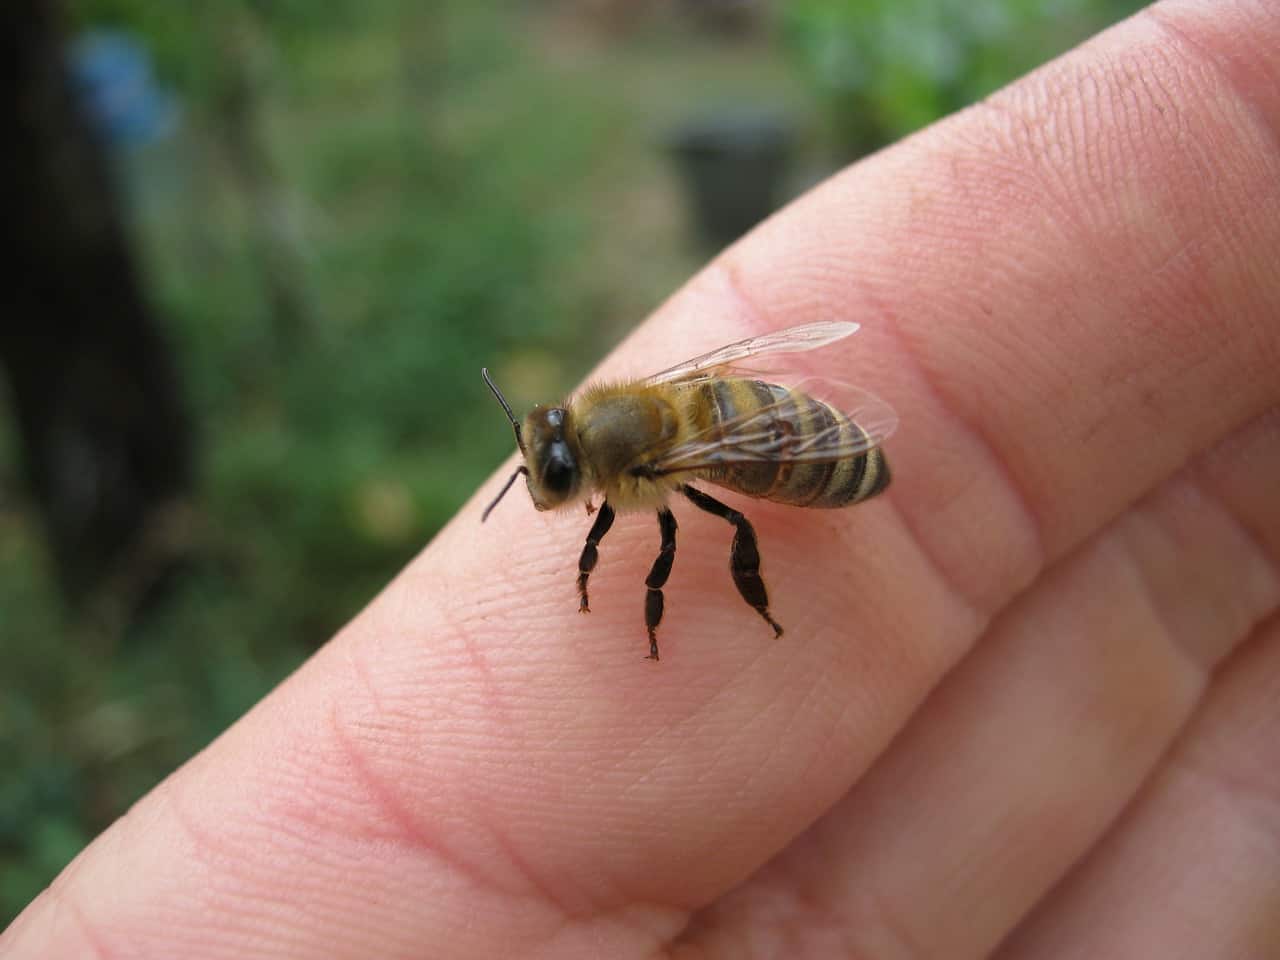 help revive a bee holding in hand